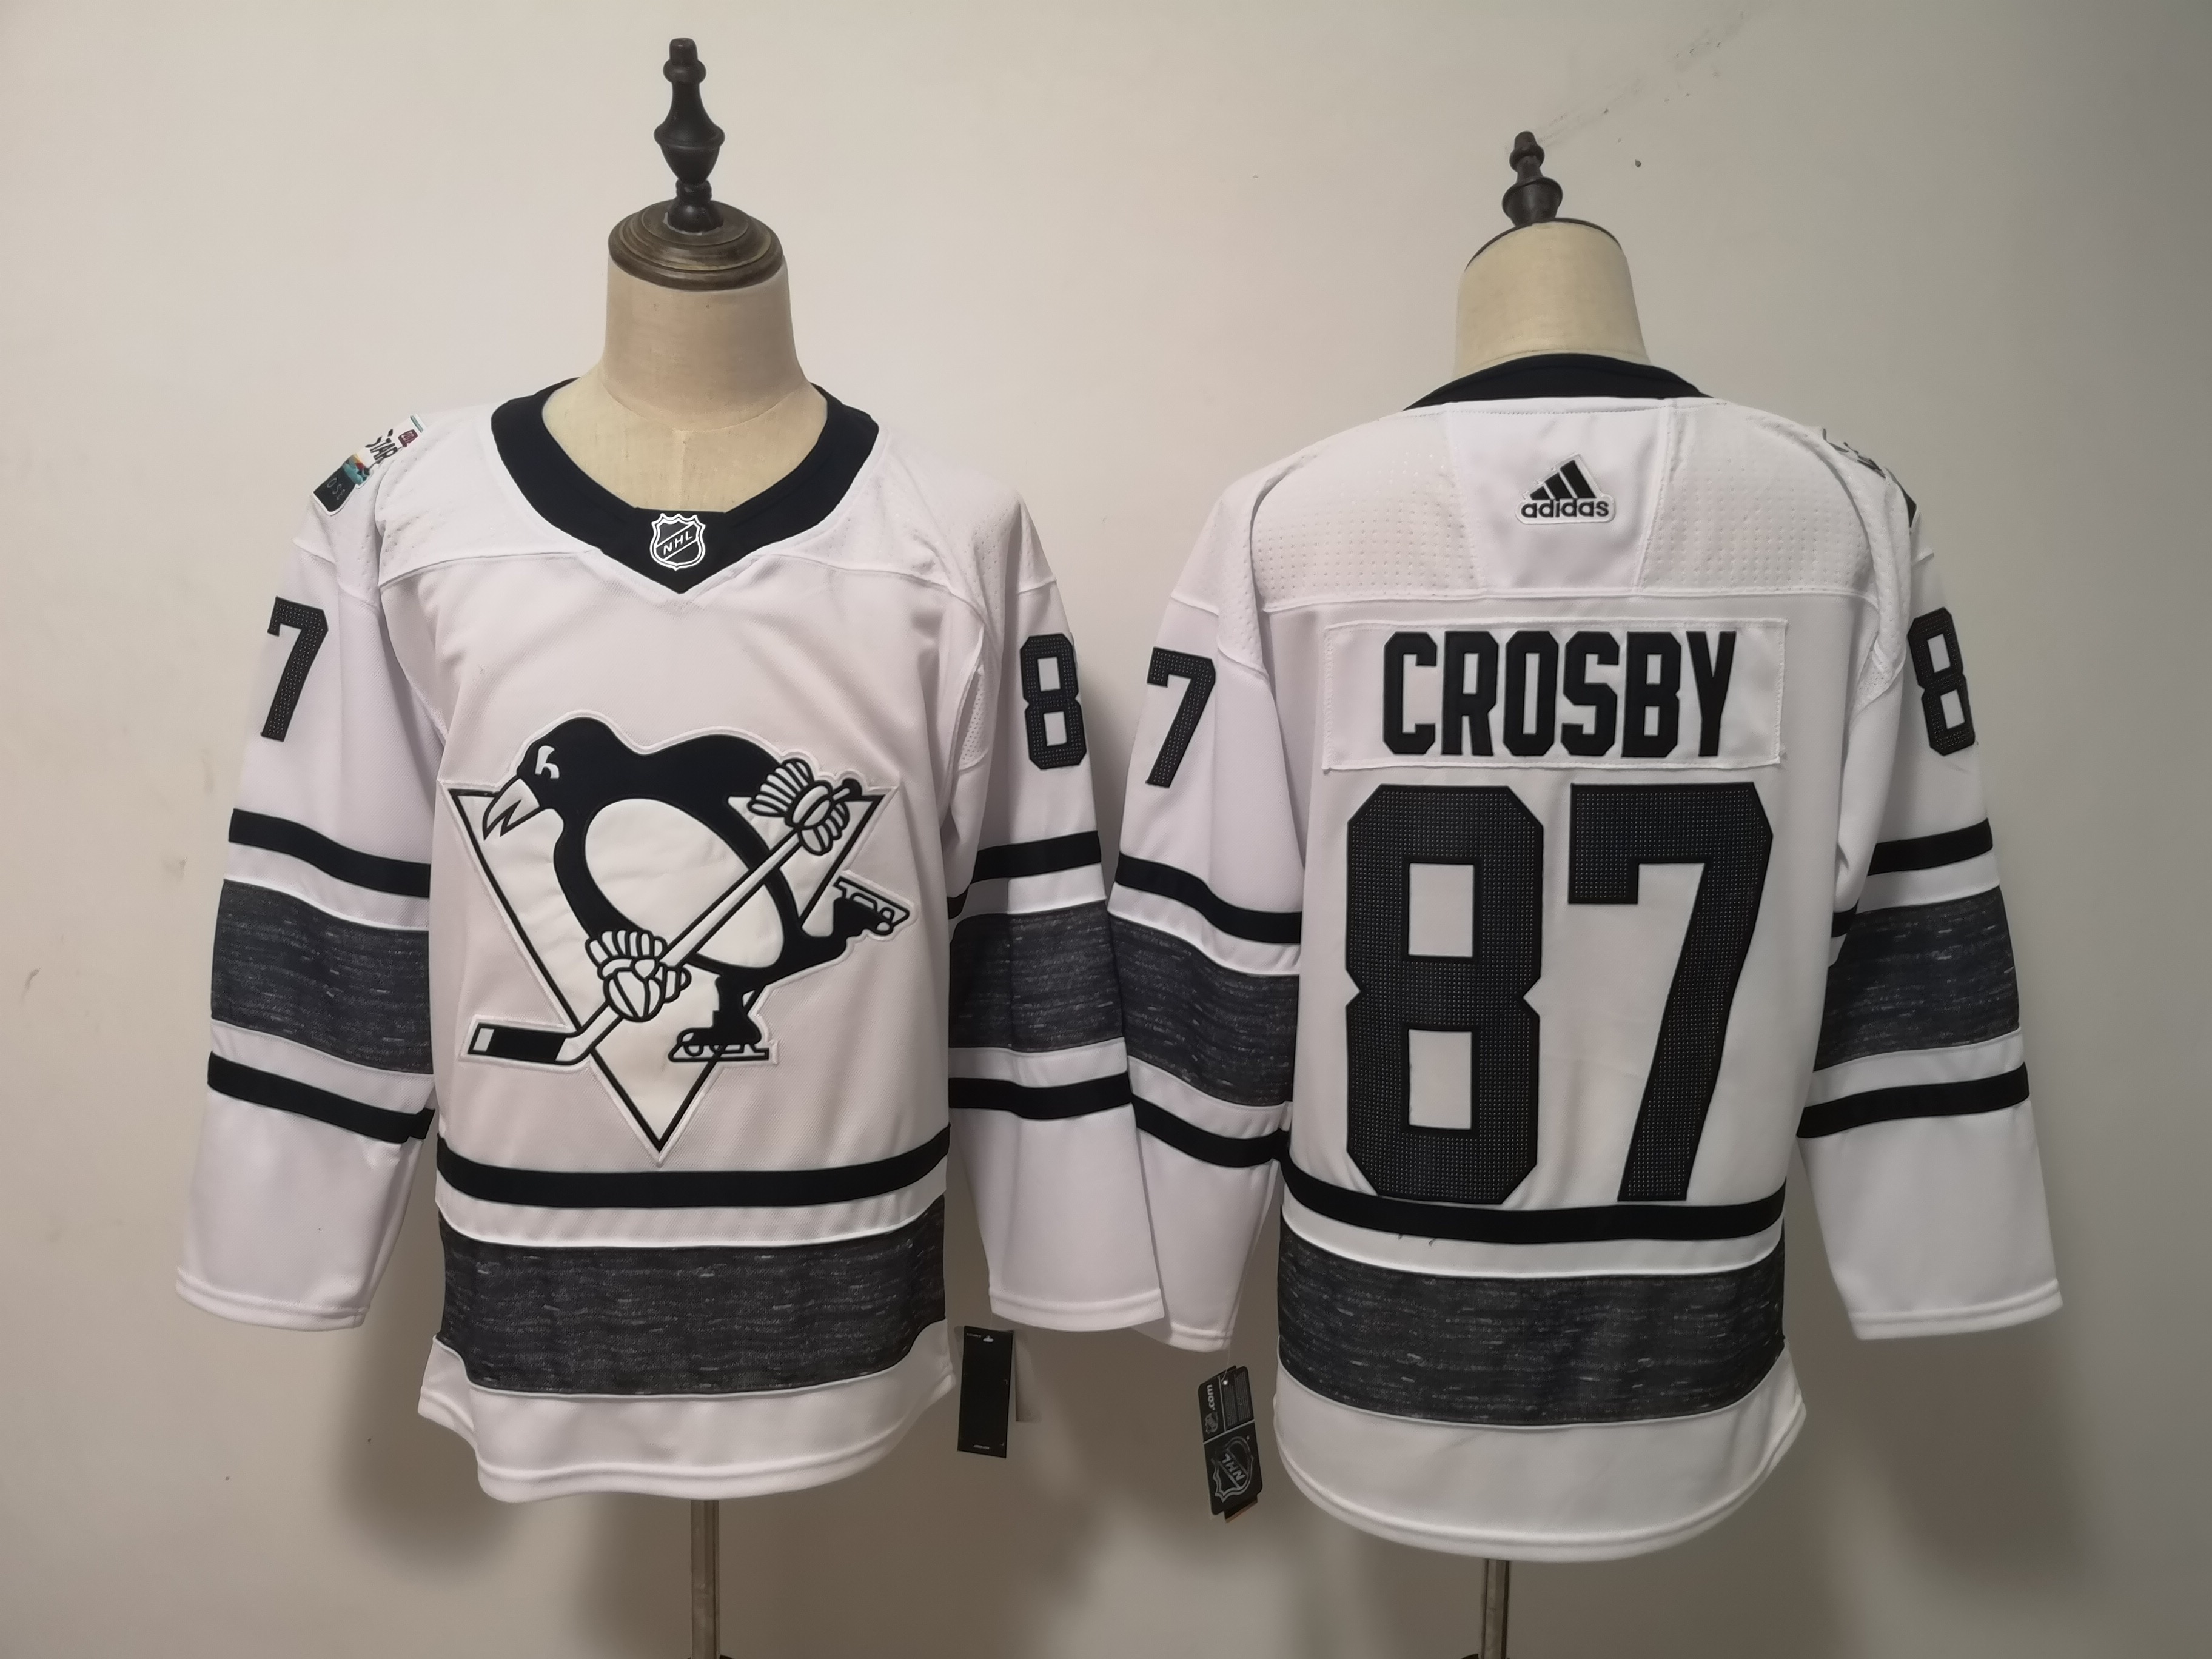 2019 Pittsburgh Penguins White #87 CROSBY All Star NHL Jersey